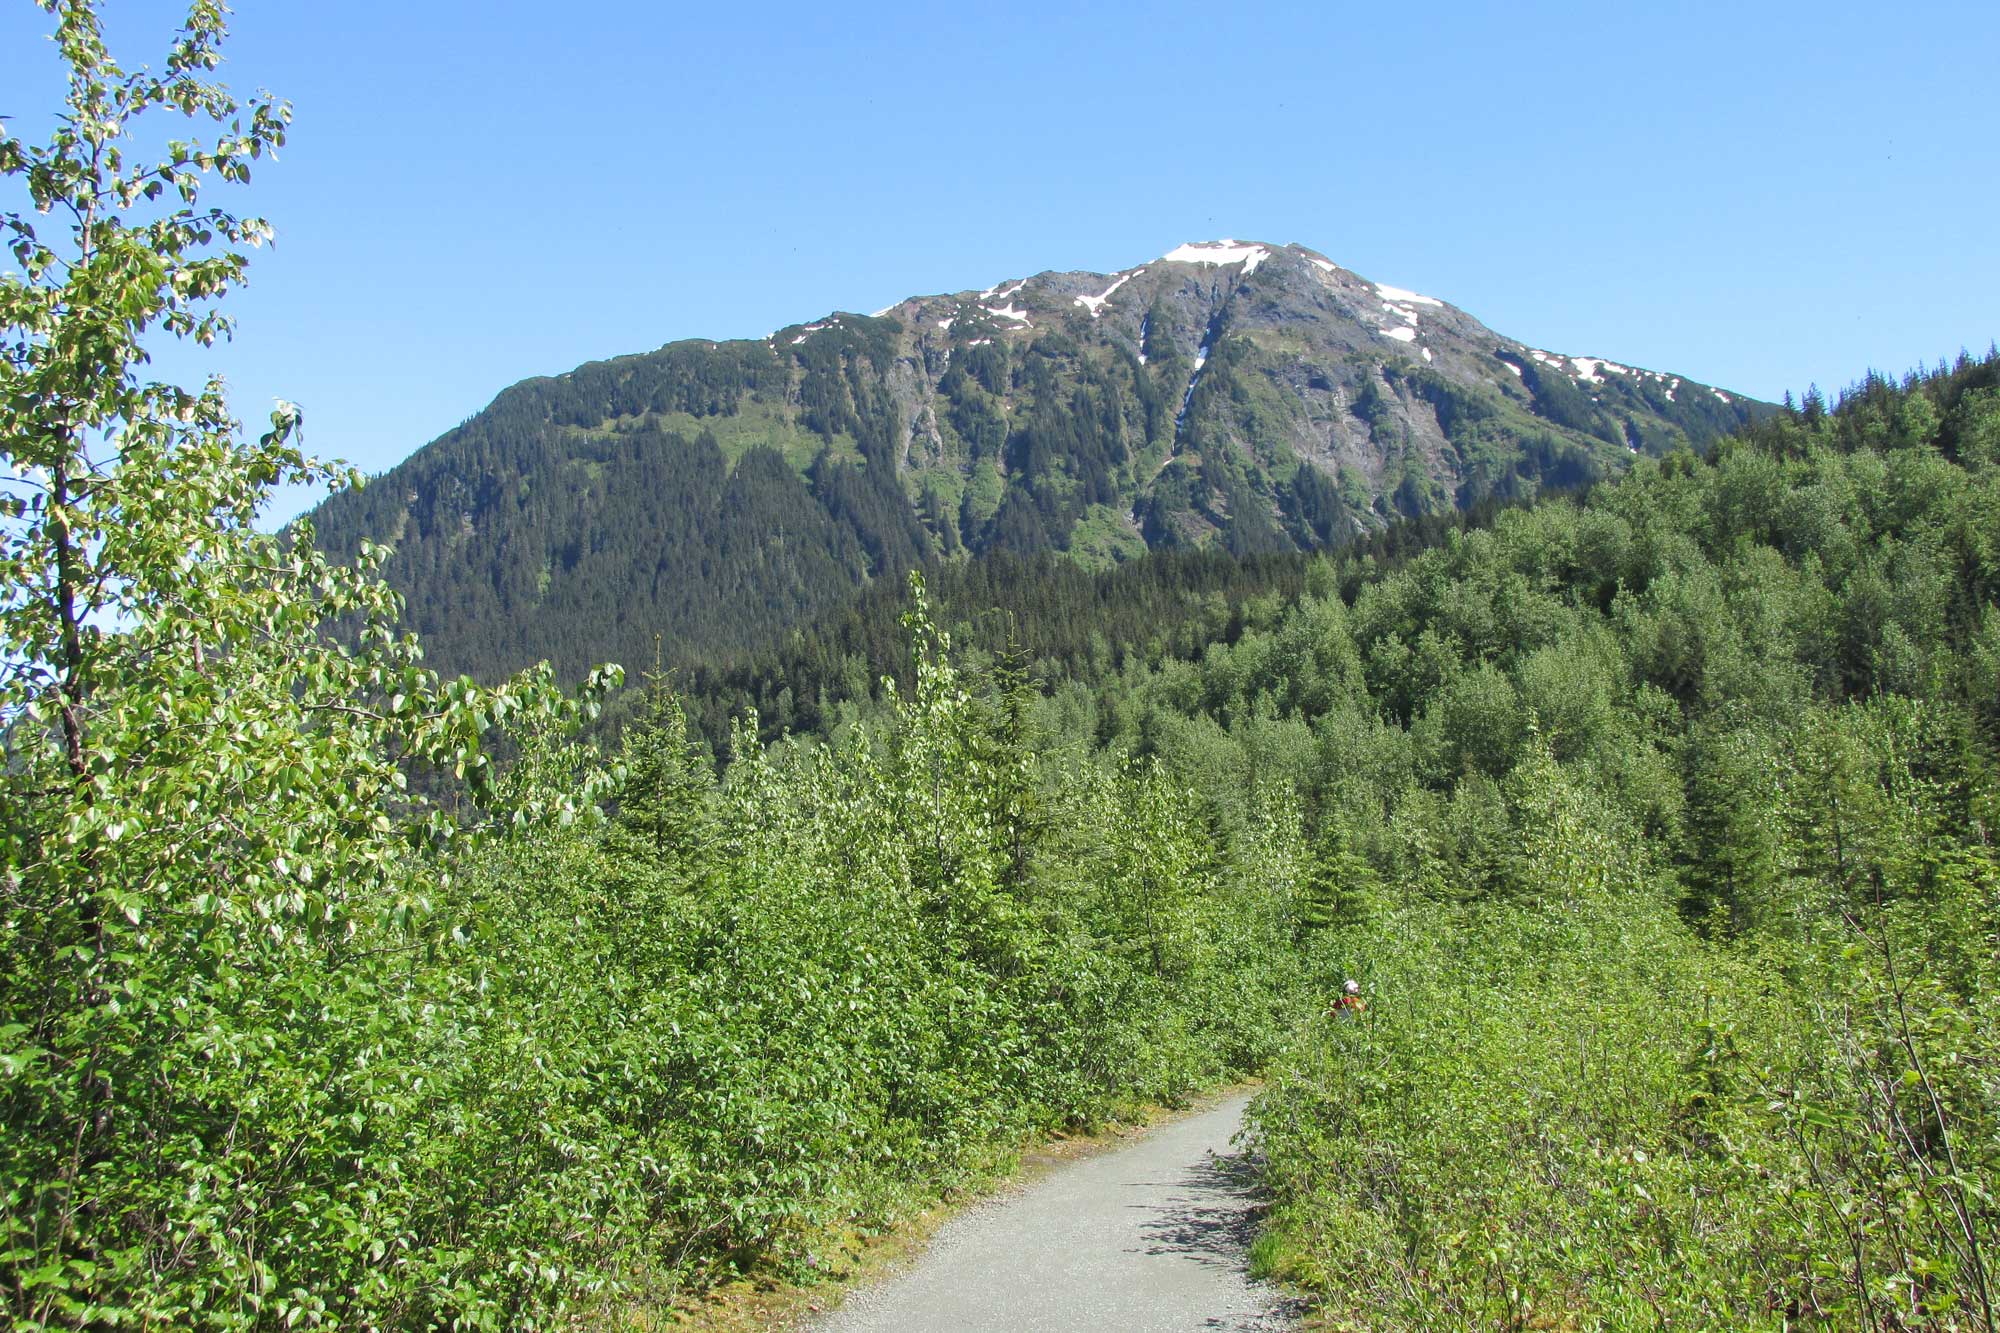 Photograph of Tongass National Forest near Juneau, Alaska. The photo shows broadleaf trees in the foreground and conifers in the distance. Int the background, a mountain with slopes covered in conifers rises. The top of the mountain has patches of snow and no trees.